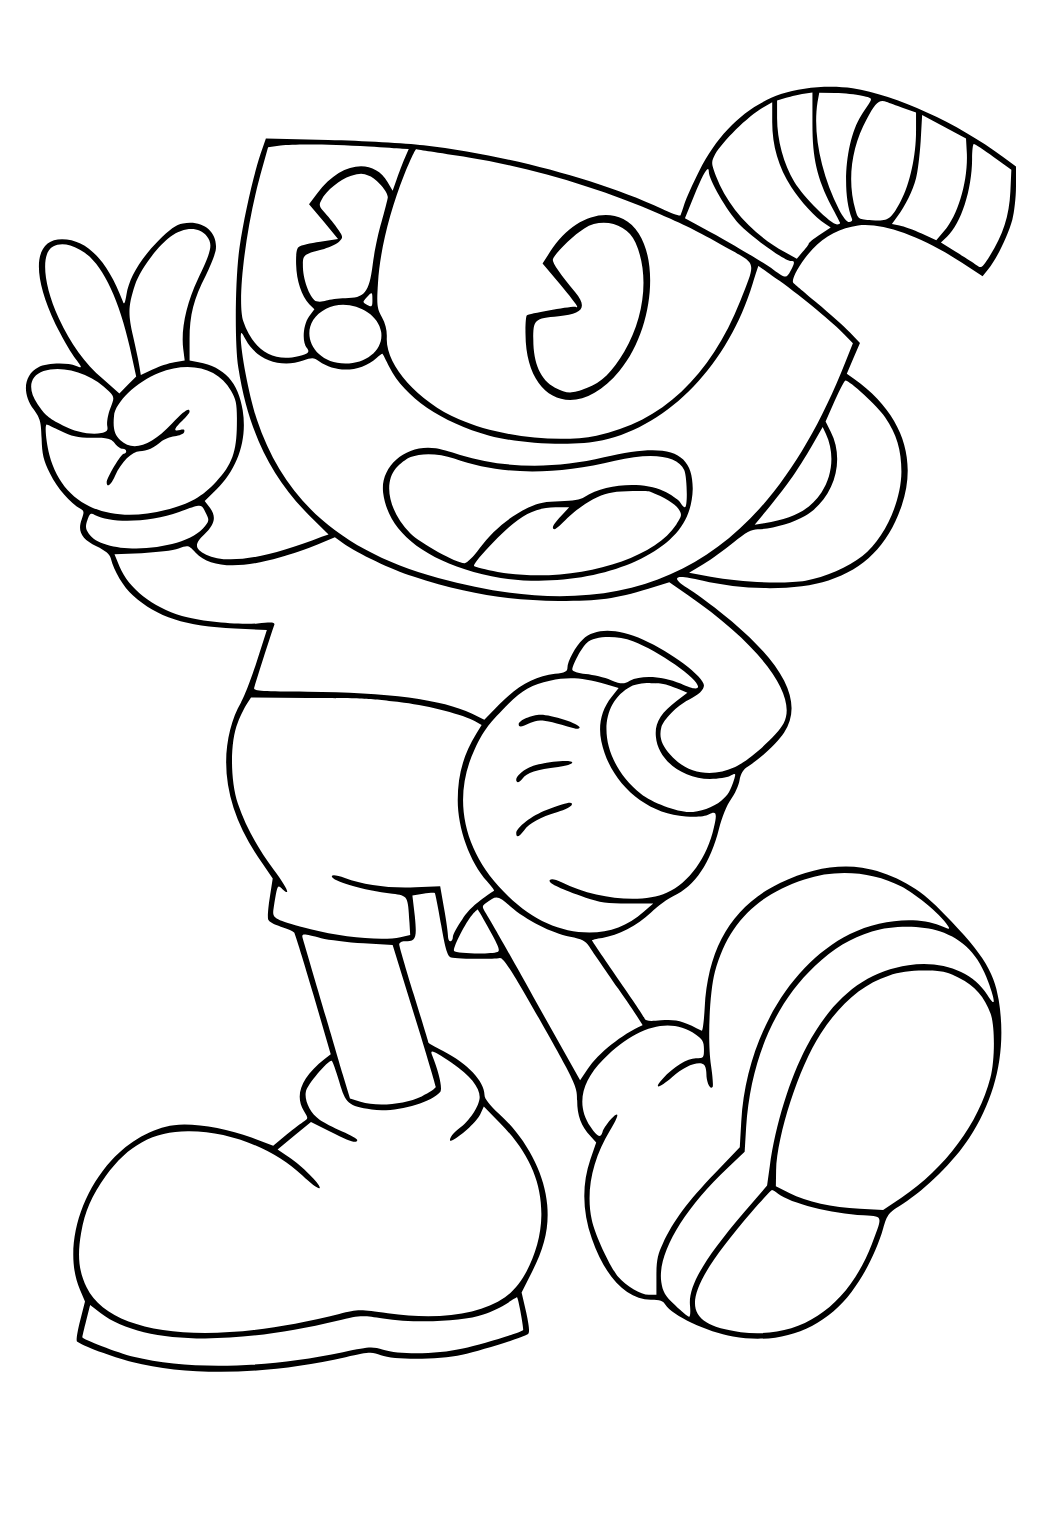 Free Printable Cuphead Victory Coloring Page for Adults and Kids ...